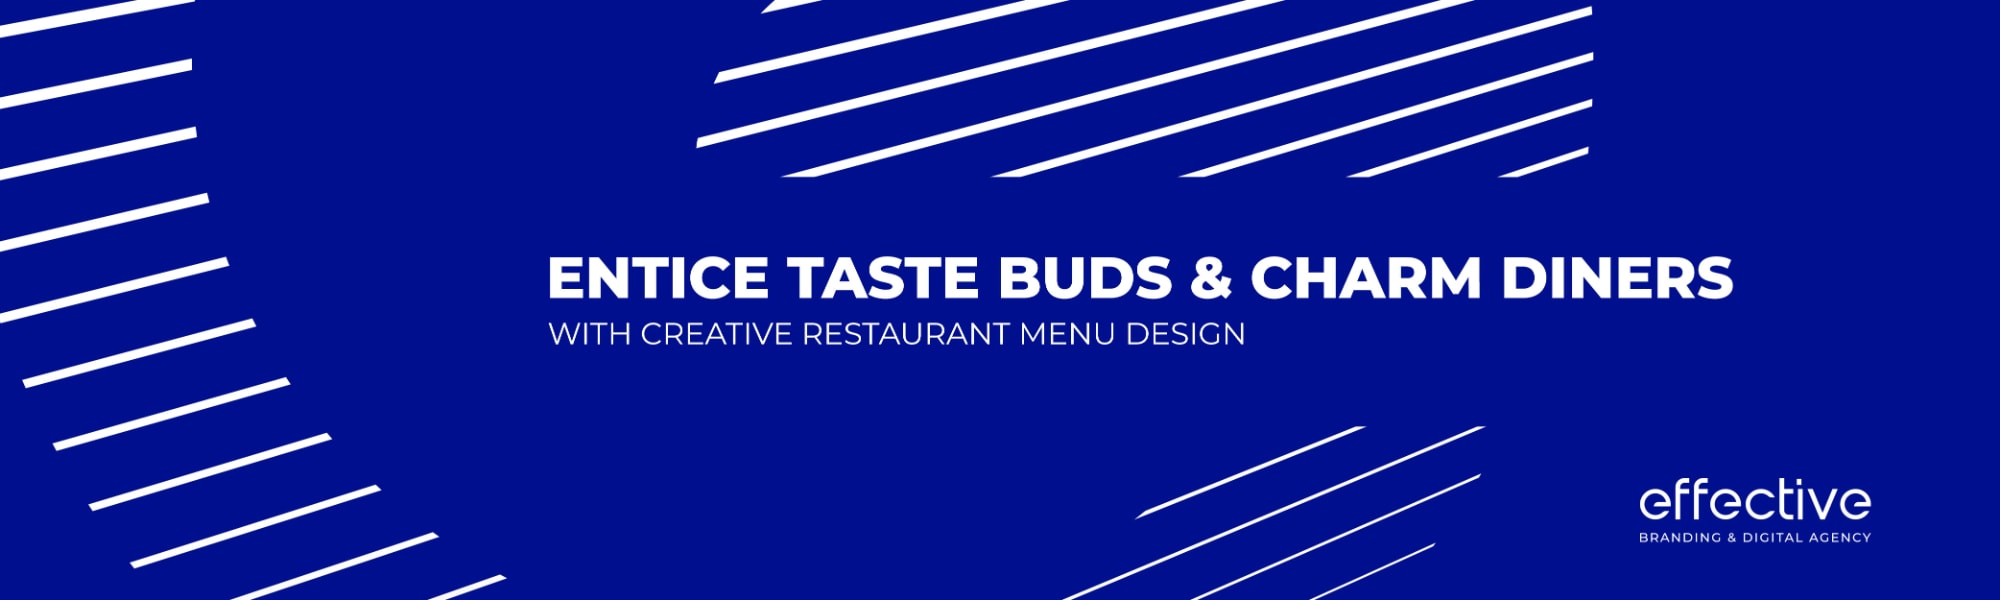 Entice Taste Buds and Charm Diners with Creative Restaurant Menu Design